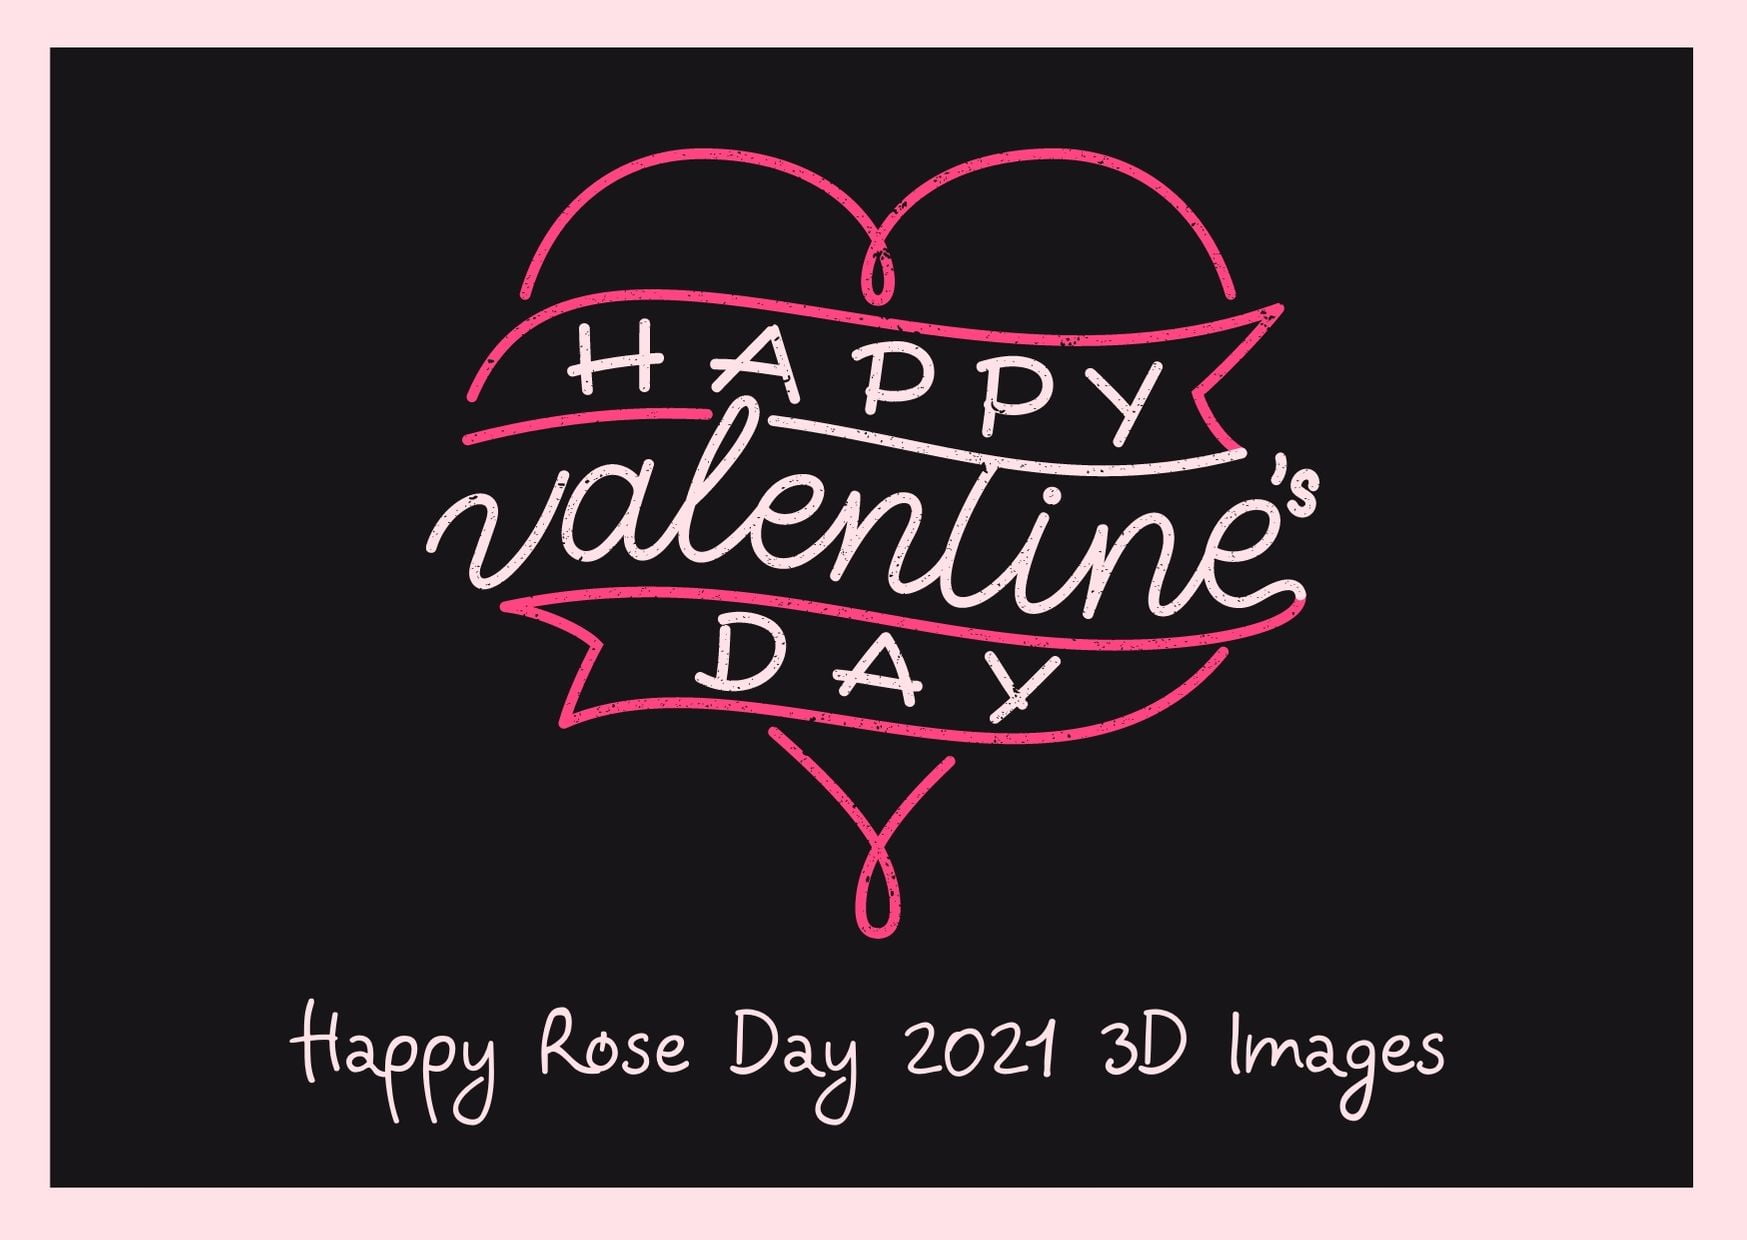 Happy Rose Day 2021 3D Images